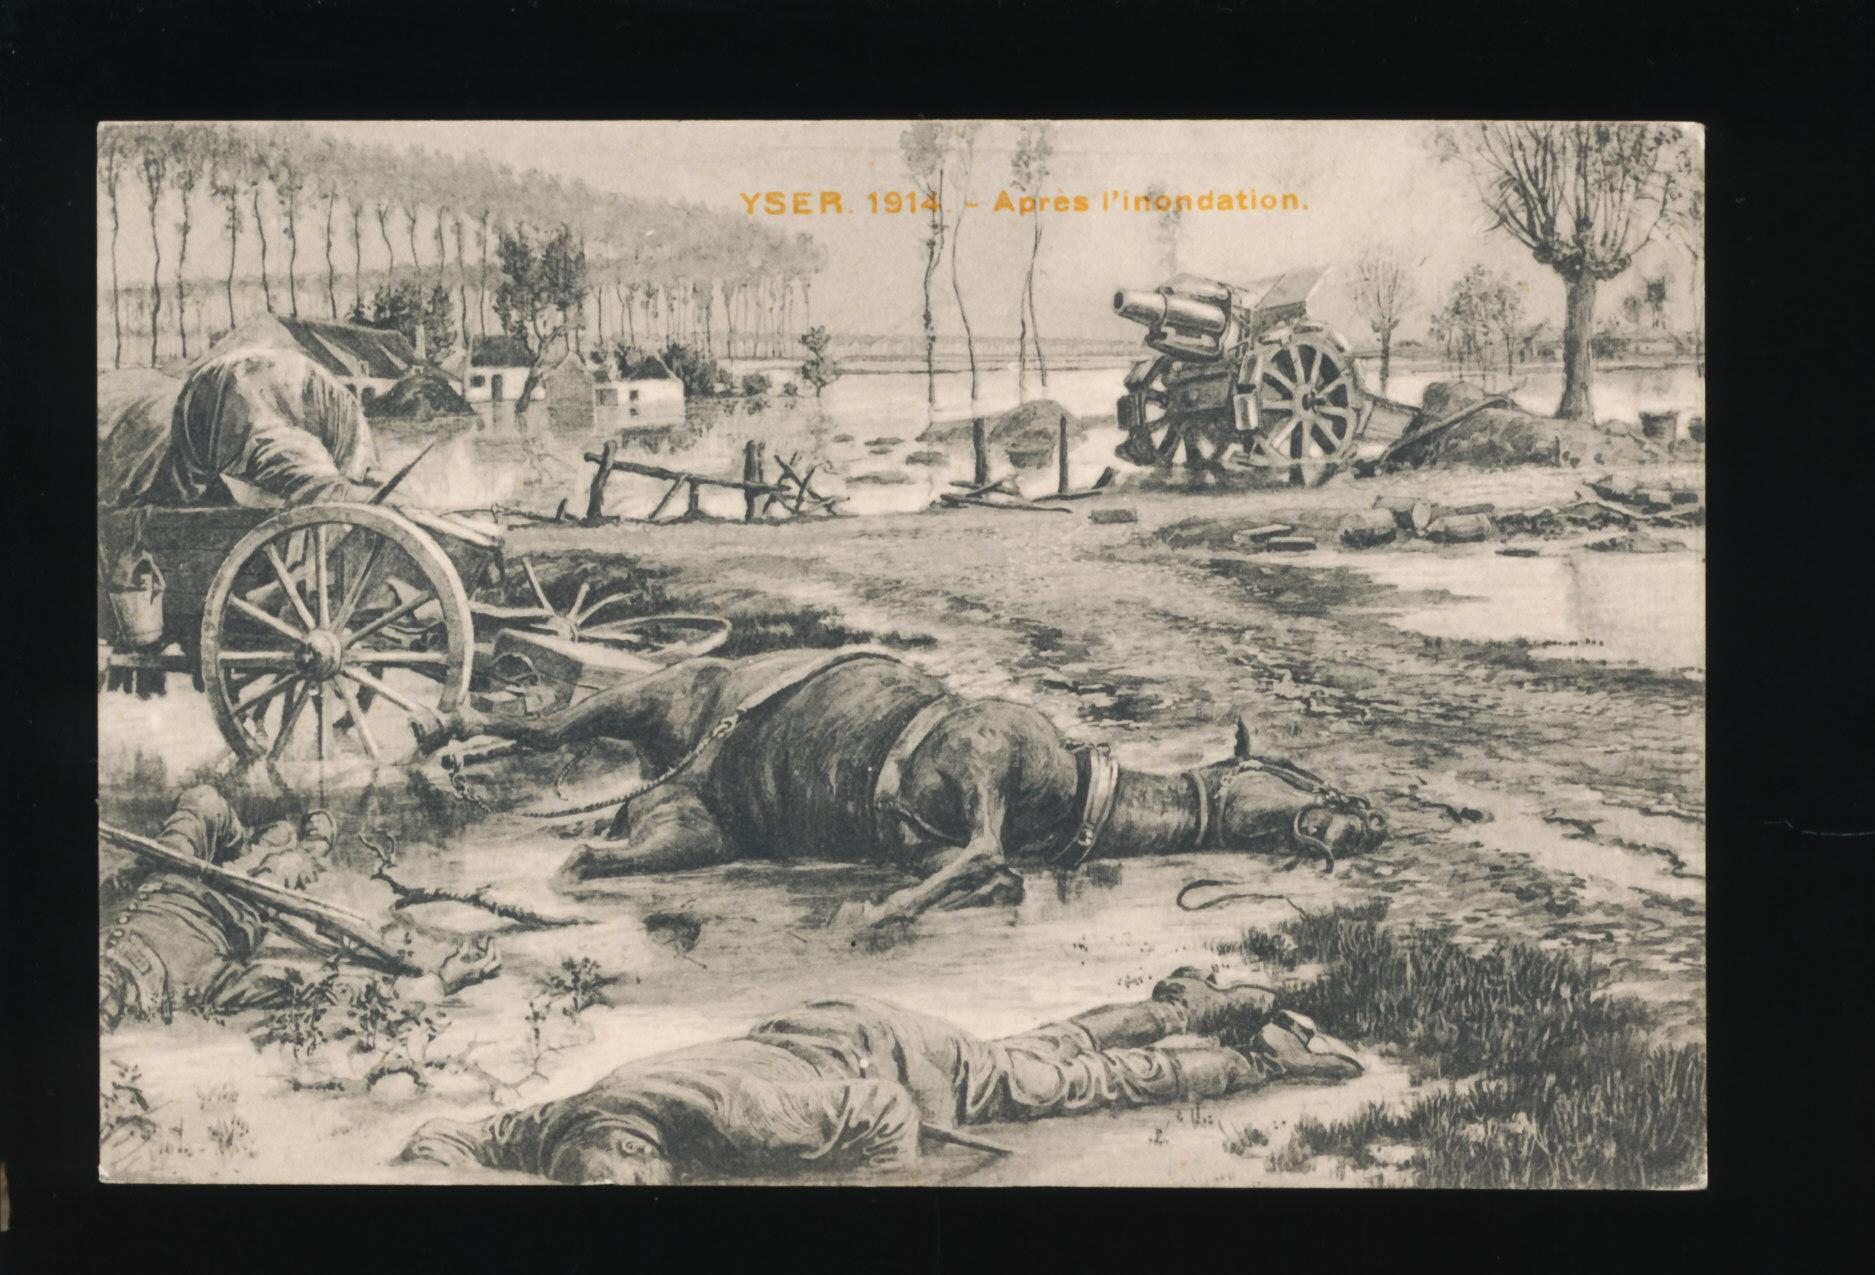 1914 (FRANCE) YSER 1914-Apres l'inondation  ('Yser was a battle of the Firs